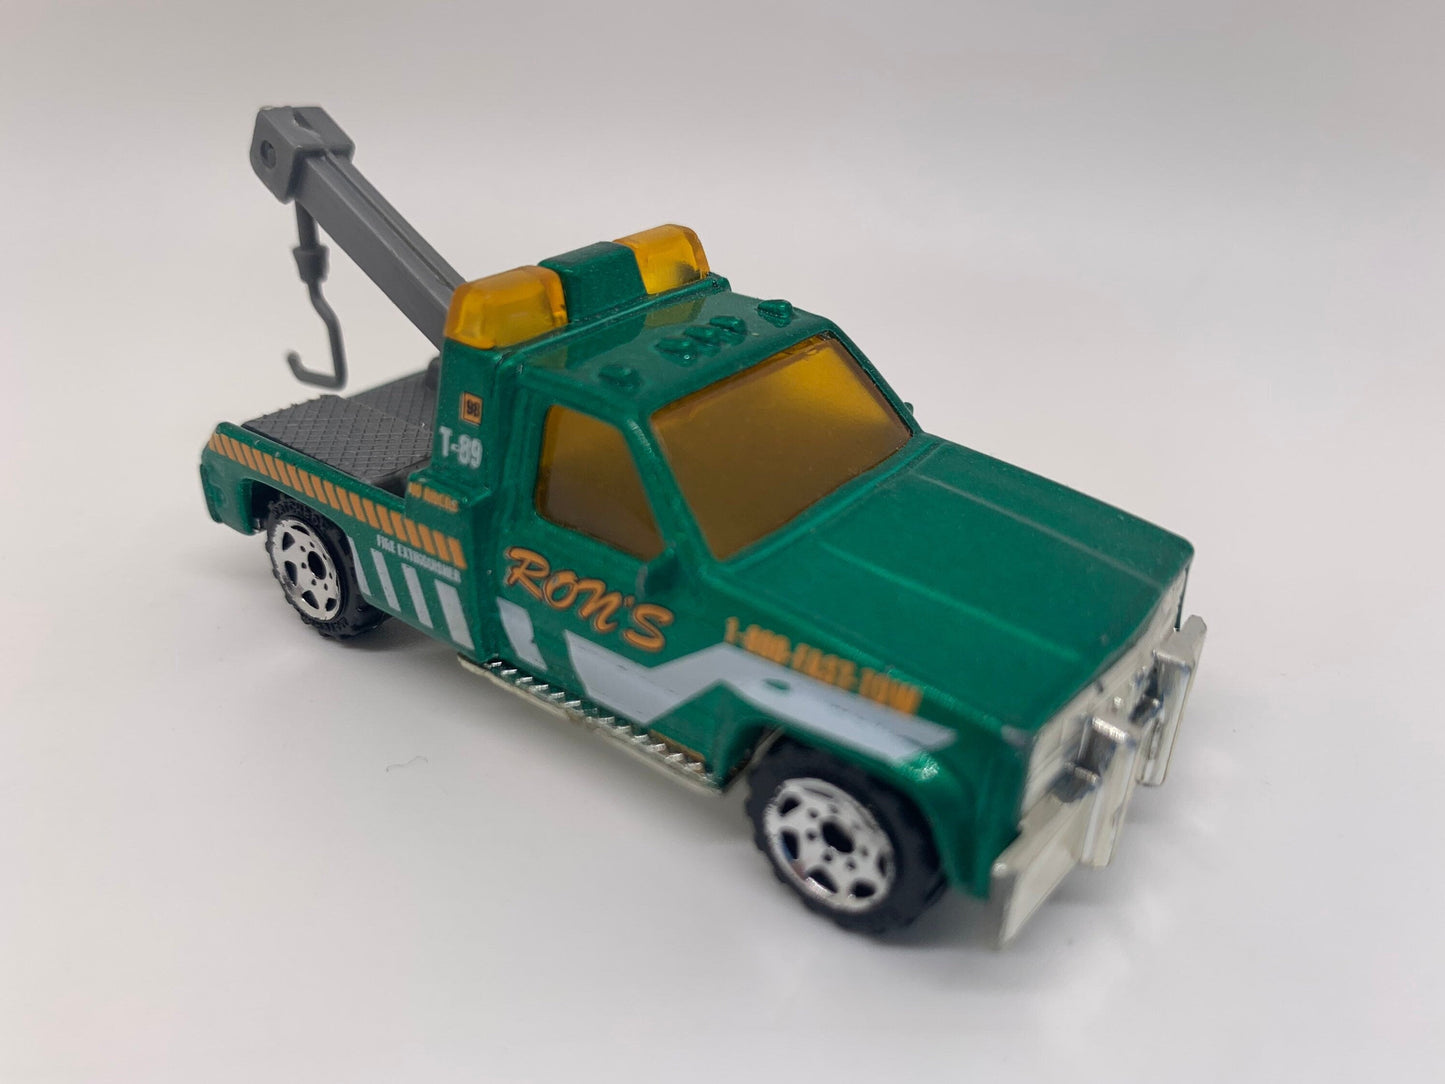 Matchbox GMC Wrecker Metalflake Green Police Patrol Perfect Birthday Gift Miniature Collectable Model Toy Car